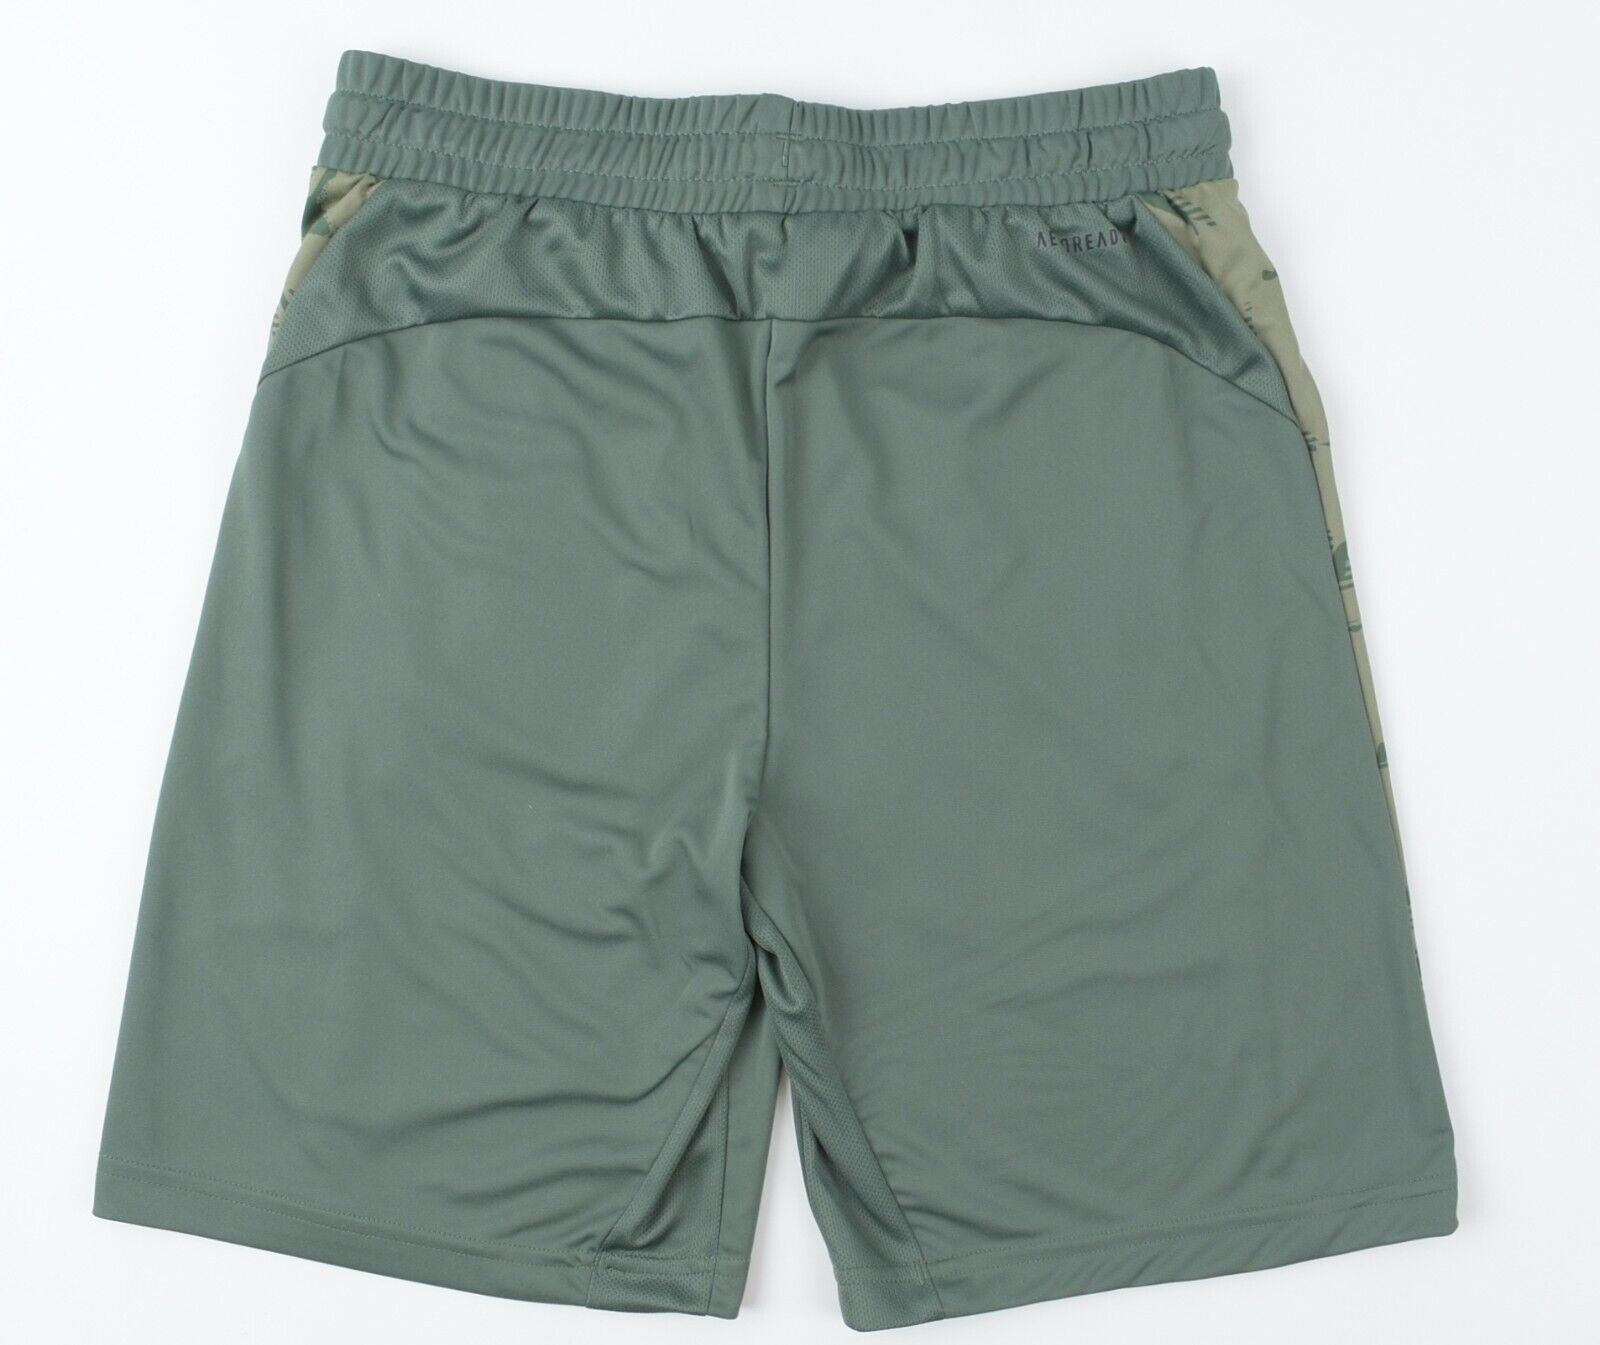 ADIDAS Boys' D2M Designed To Move Shorts, Green/Camo, size 11-12 Years